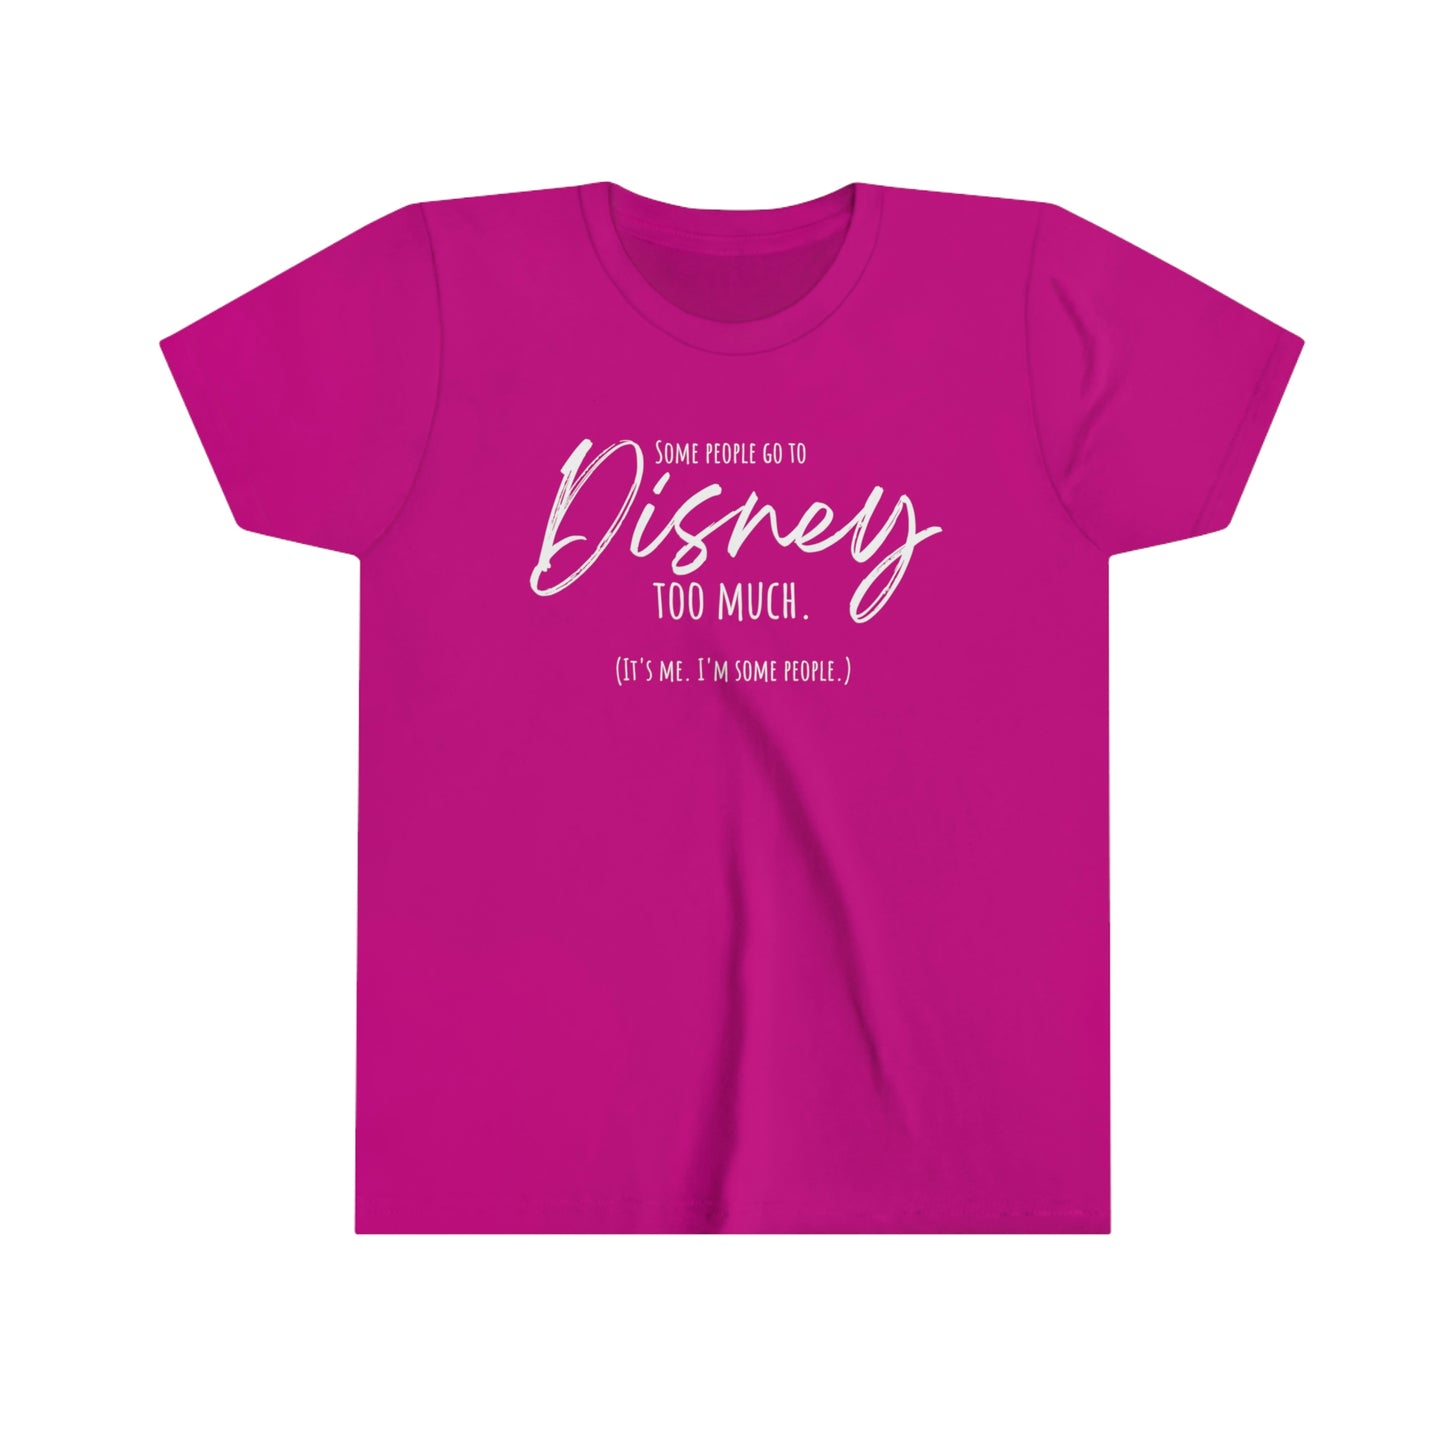 Some People Go To Disney Too Much - Youth Short Sleeve Tee Shirt